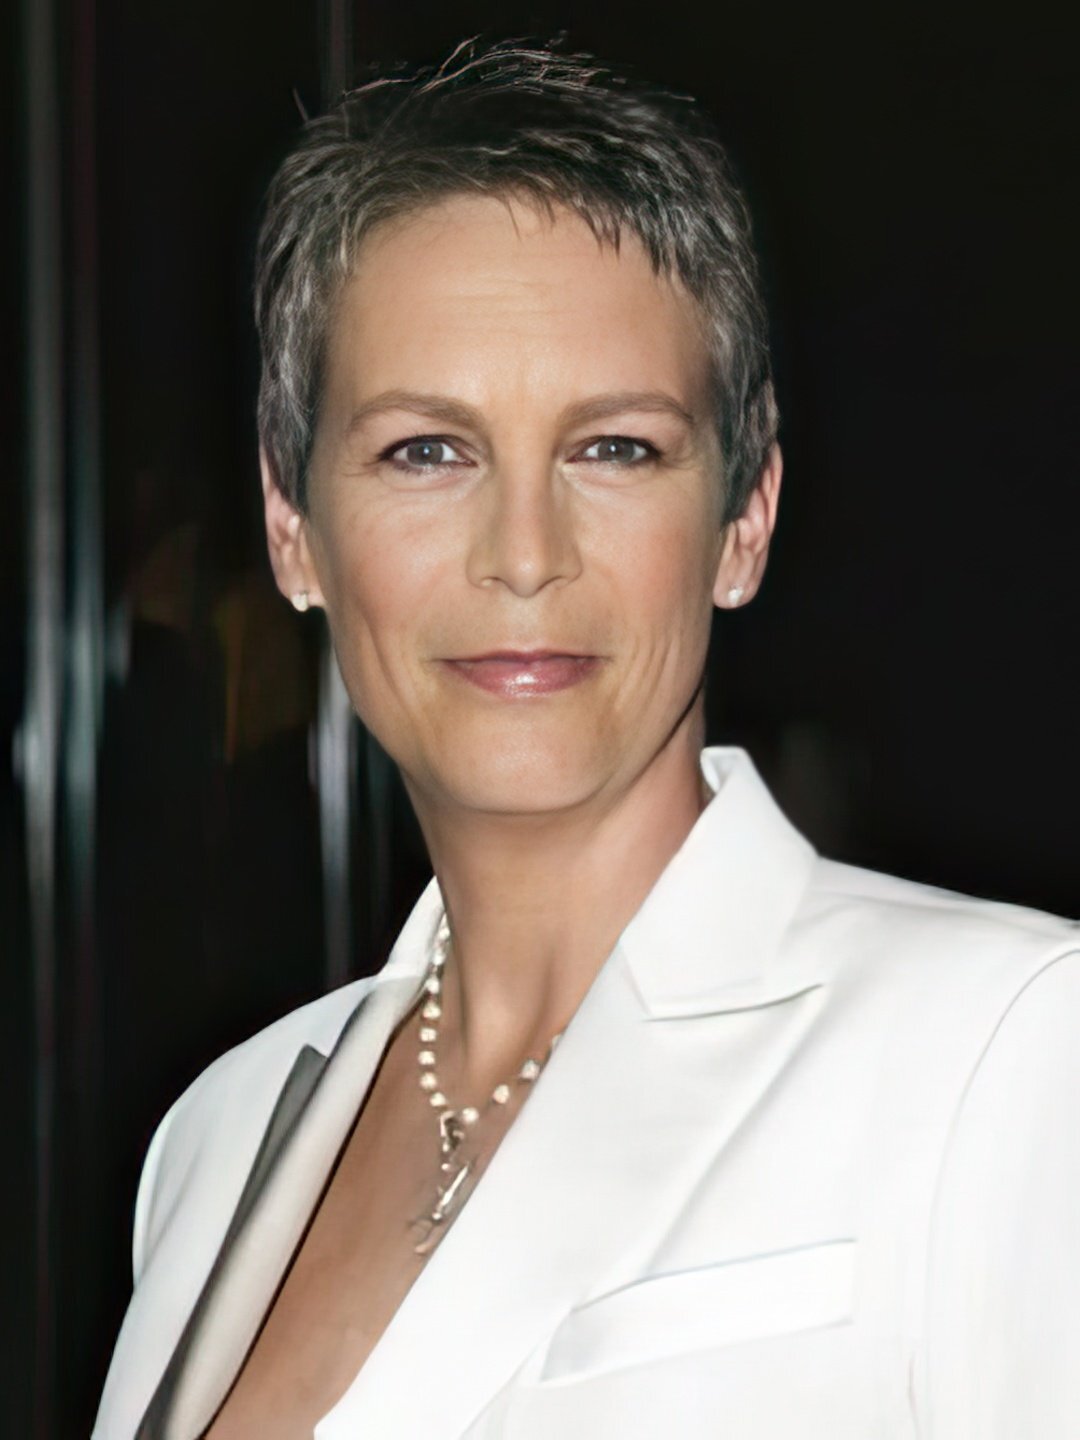 Jamie Lee Curtis does she have a husband